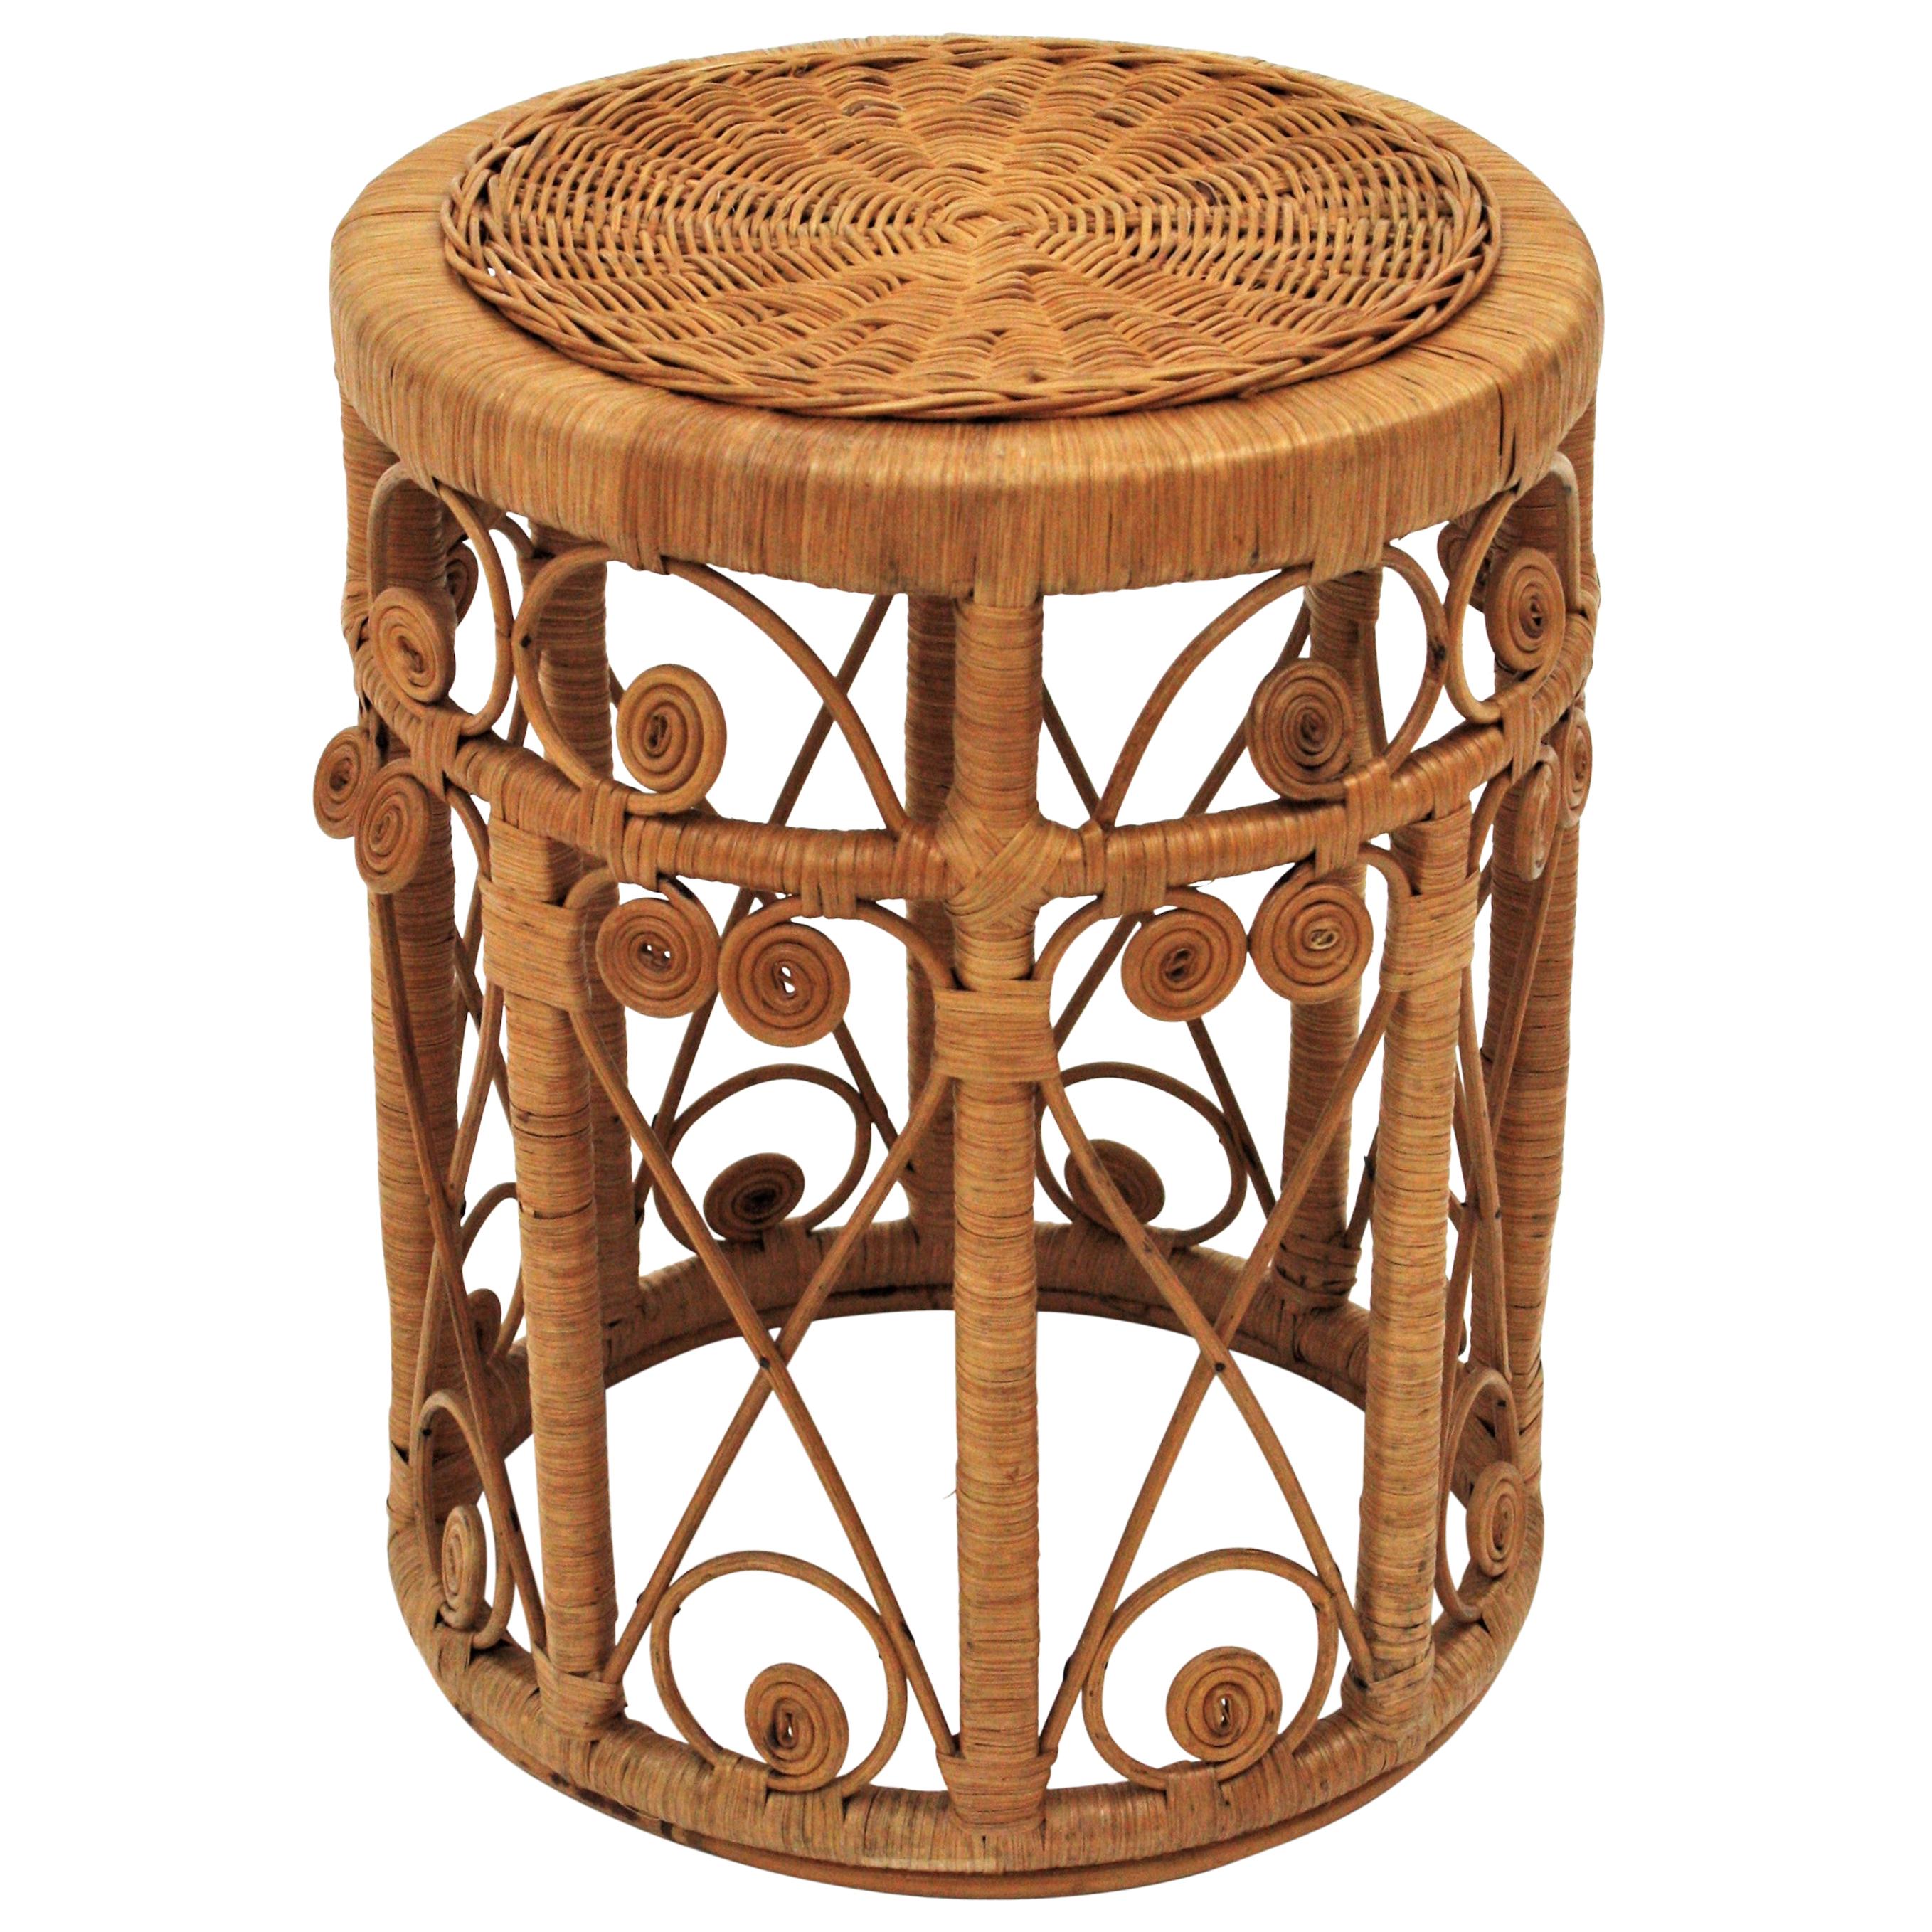 Rattan Round Stool or End Table with Filigree Details, 1960s